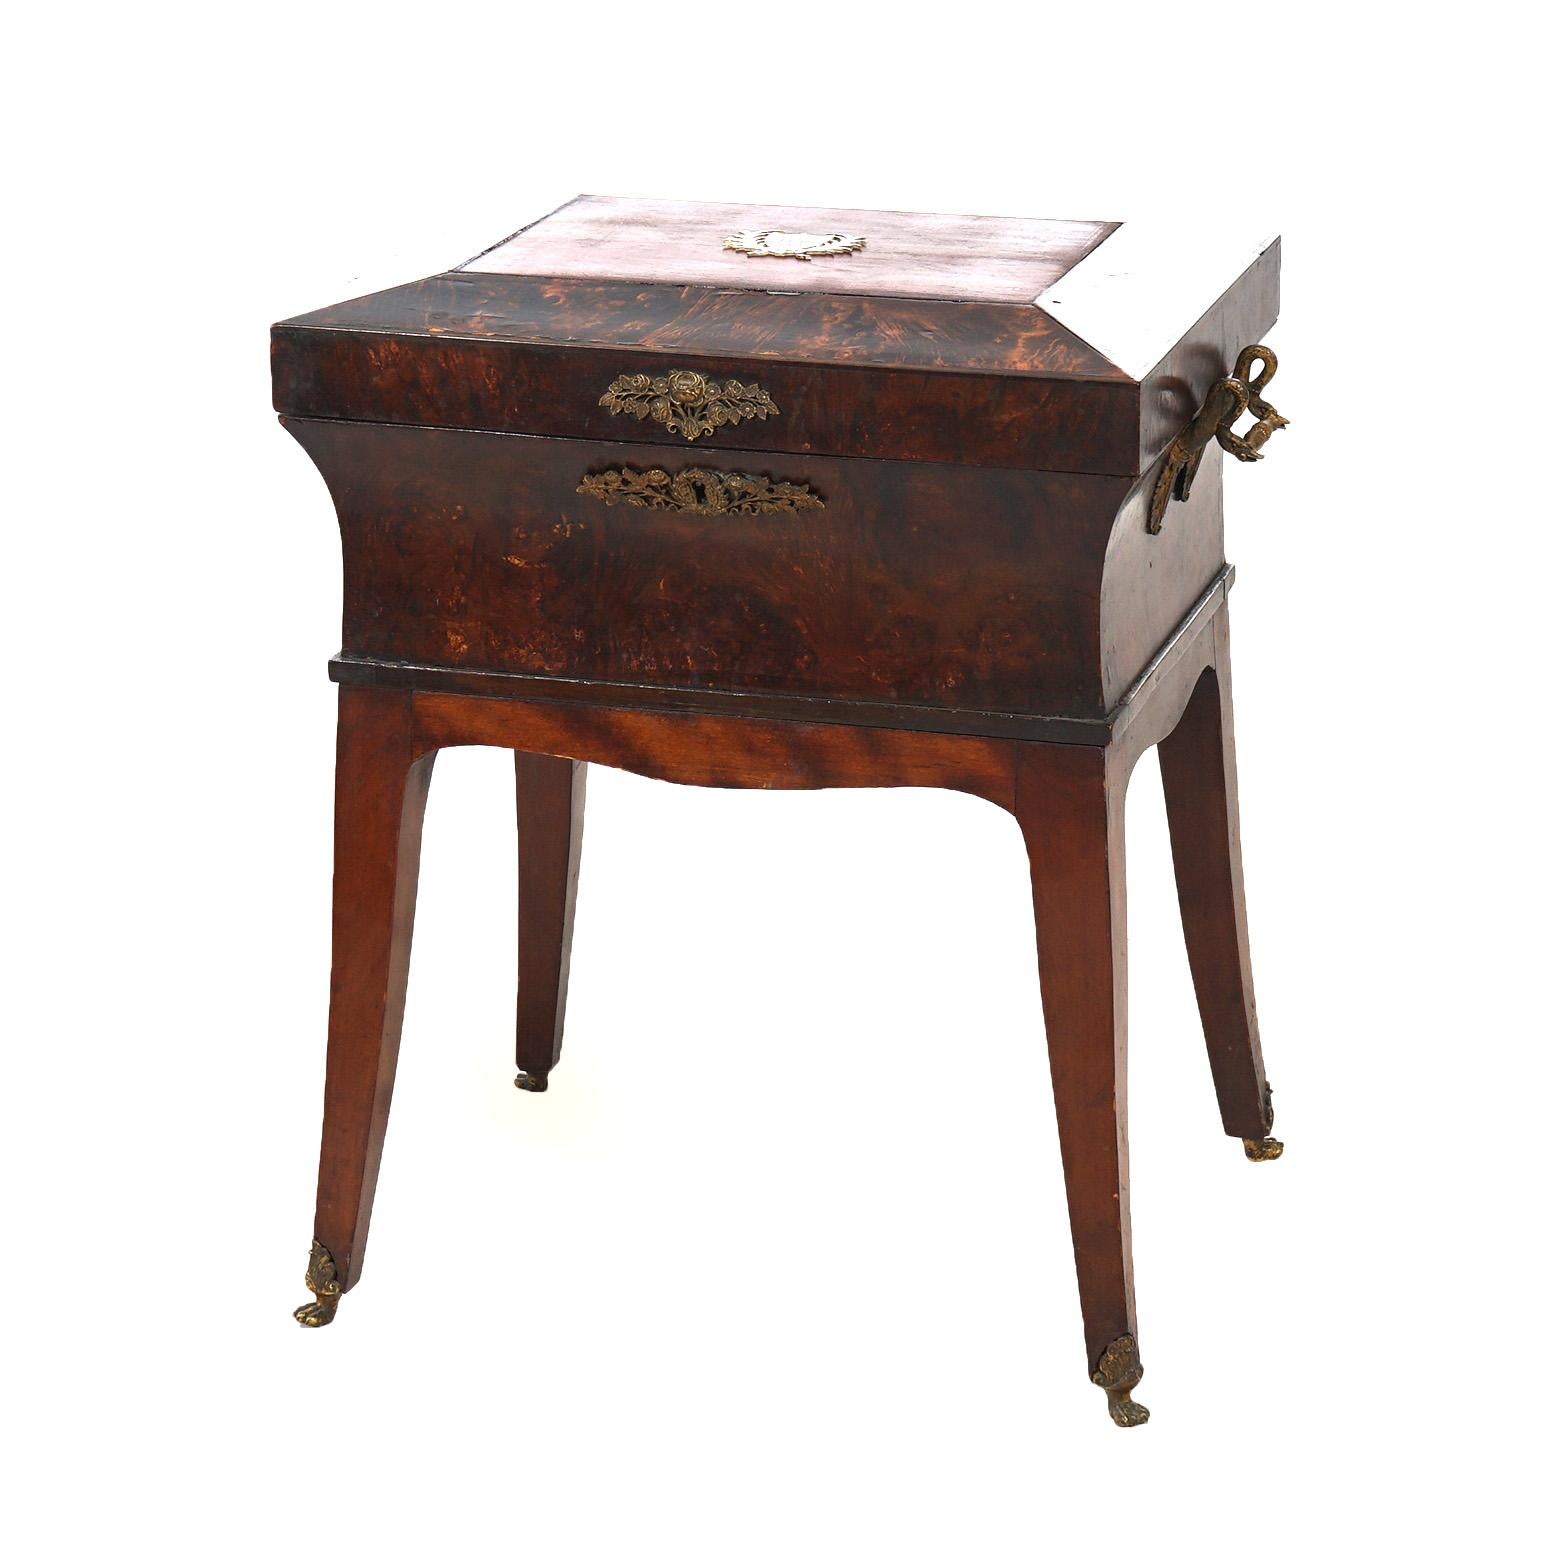 An antique French Louis XVI sewing box or jewel chest offers oliv wood construction with faceted lid having inlaid coat of arms, raised on slightly splayed legs, c1800

Measures - 22